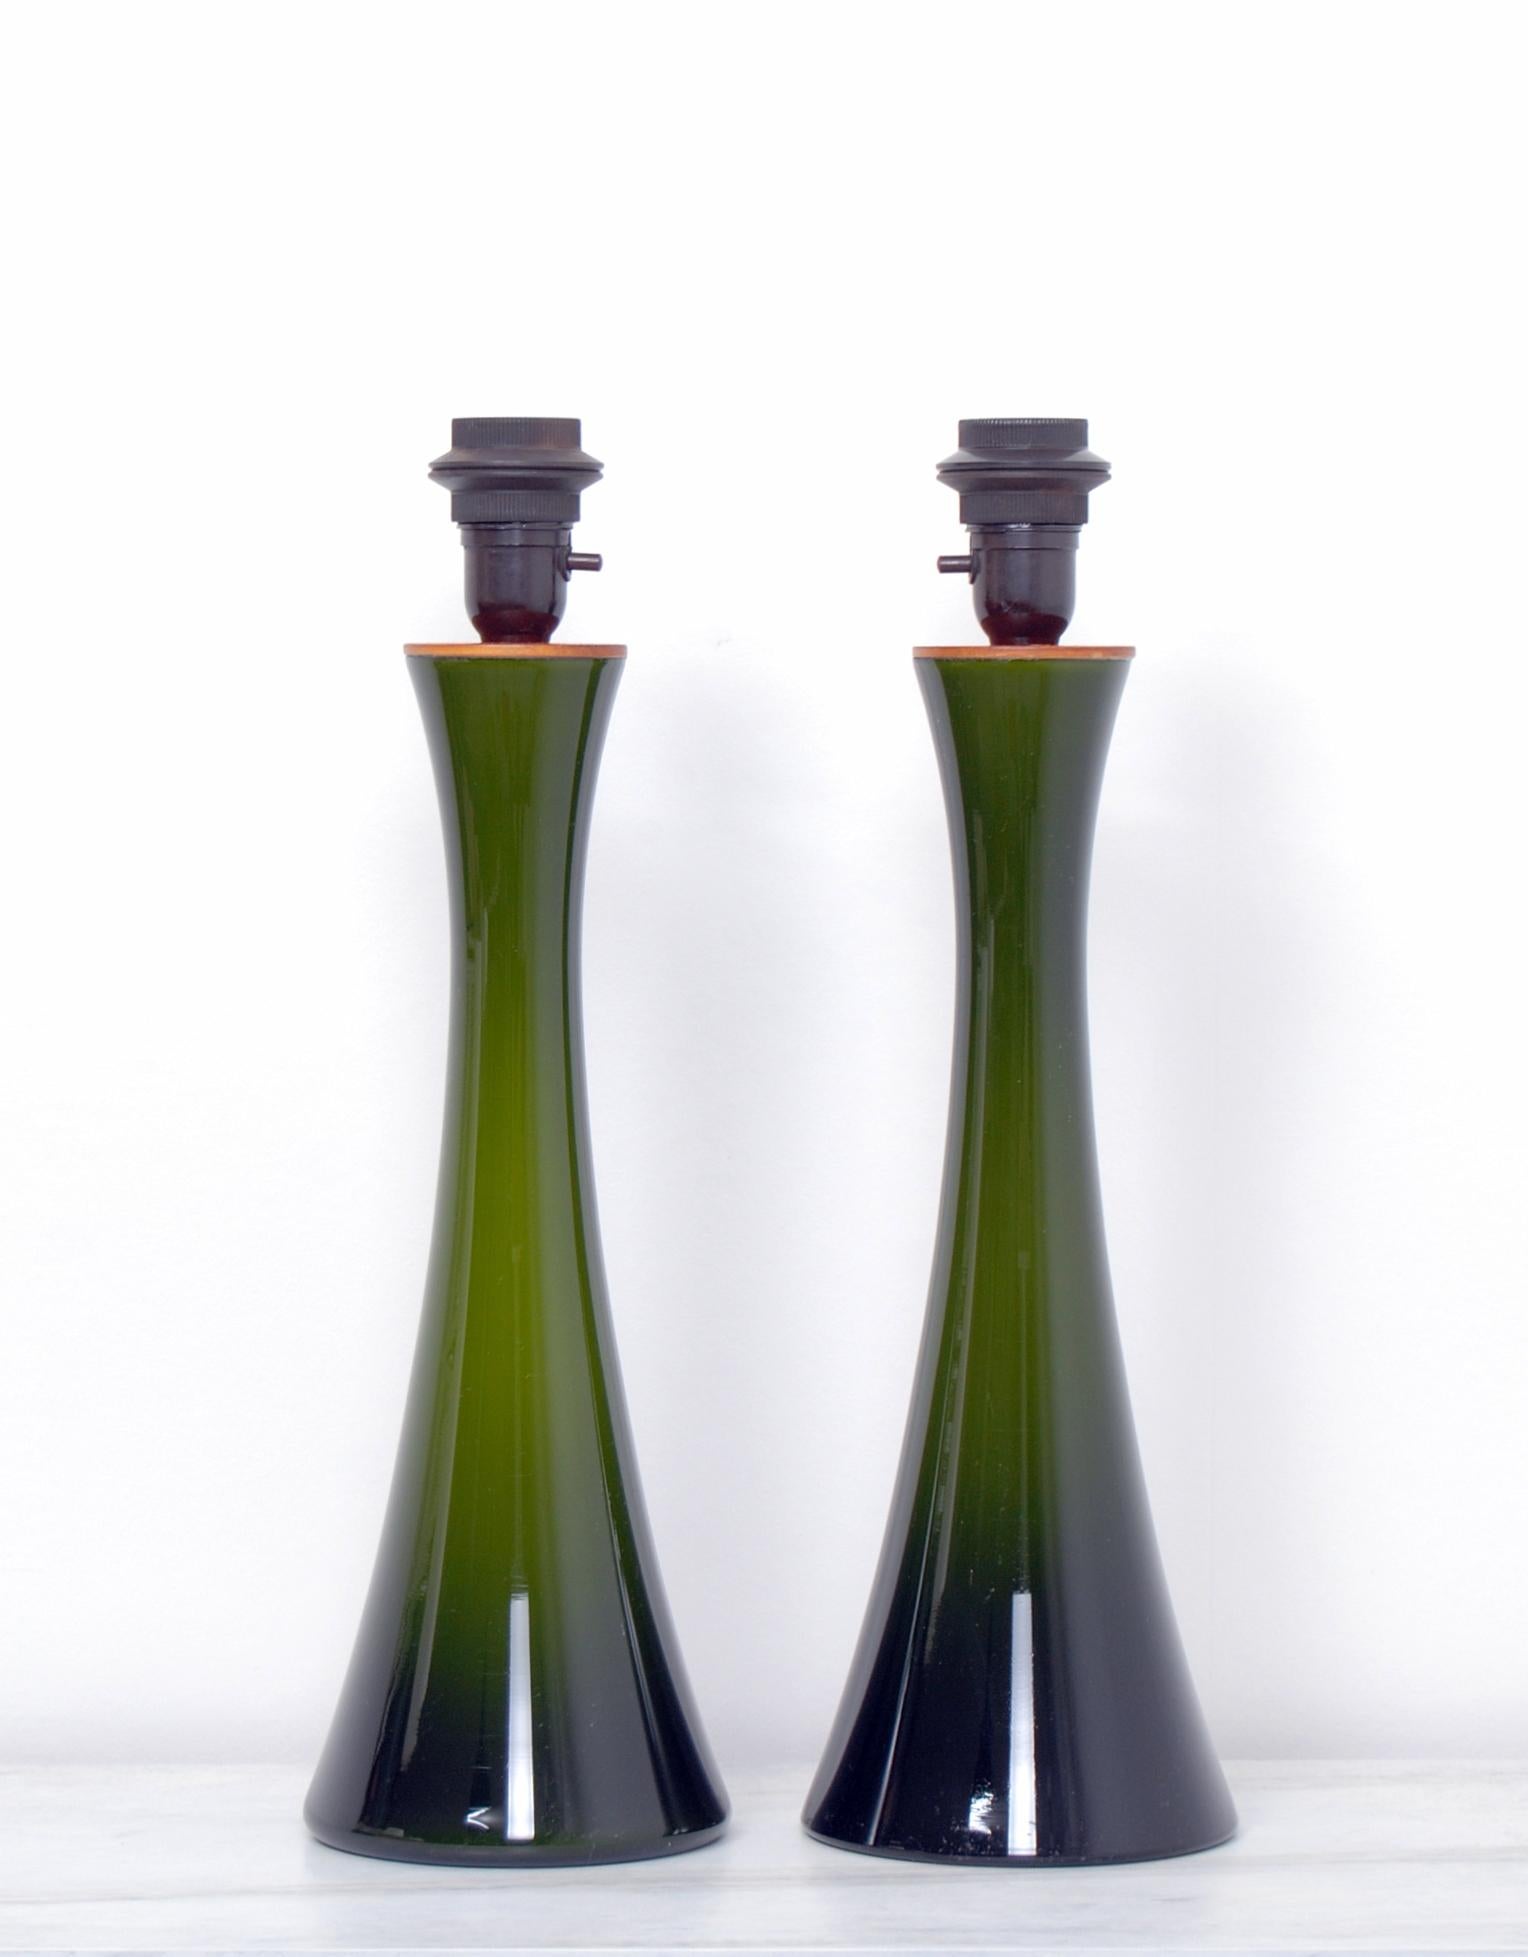 A pair of diabolo shaped Swedish green glass table lamps with teak fittings. Designed by Berndt Nordstedt for Bergboms. Newly rewired. For sale without the shades. The measurements and shipping costs stated are of the lamps without the shades.
  